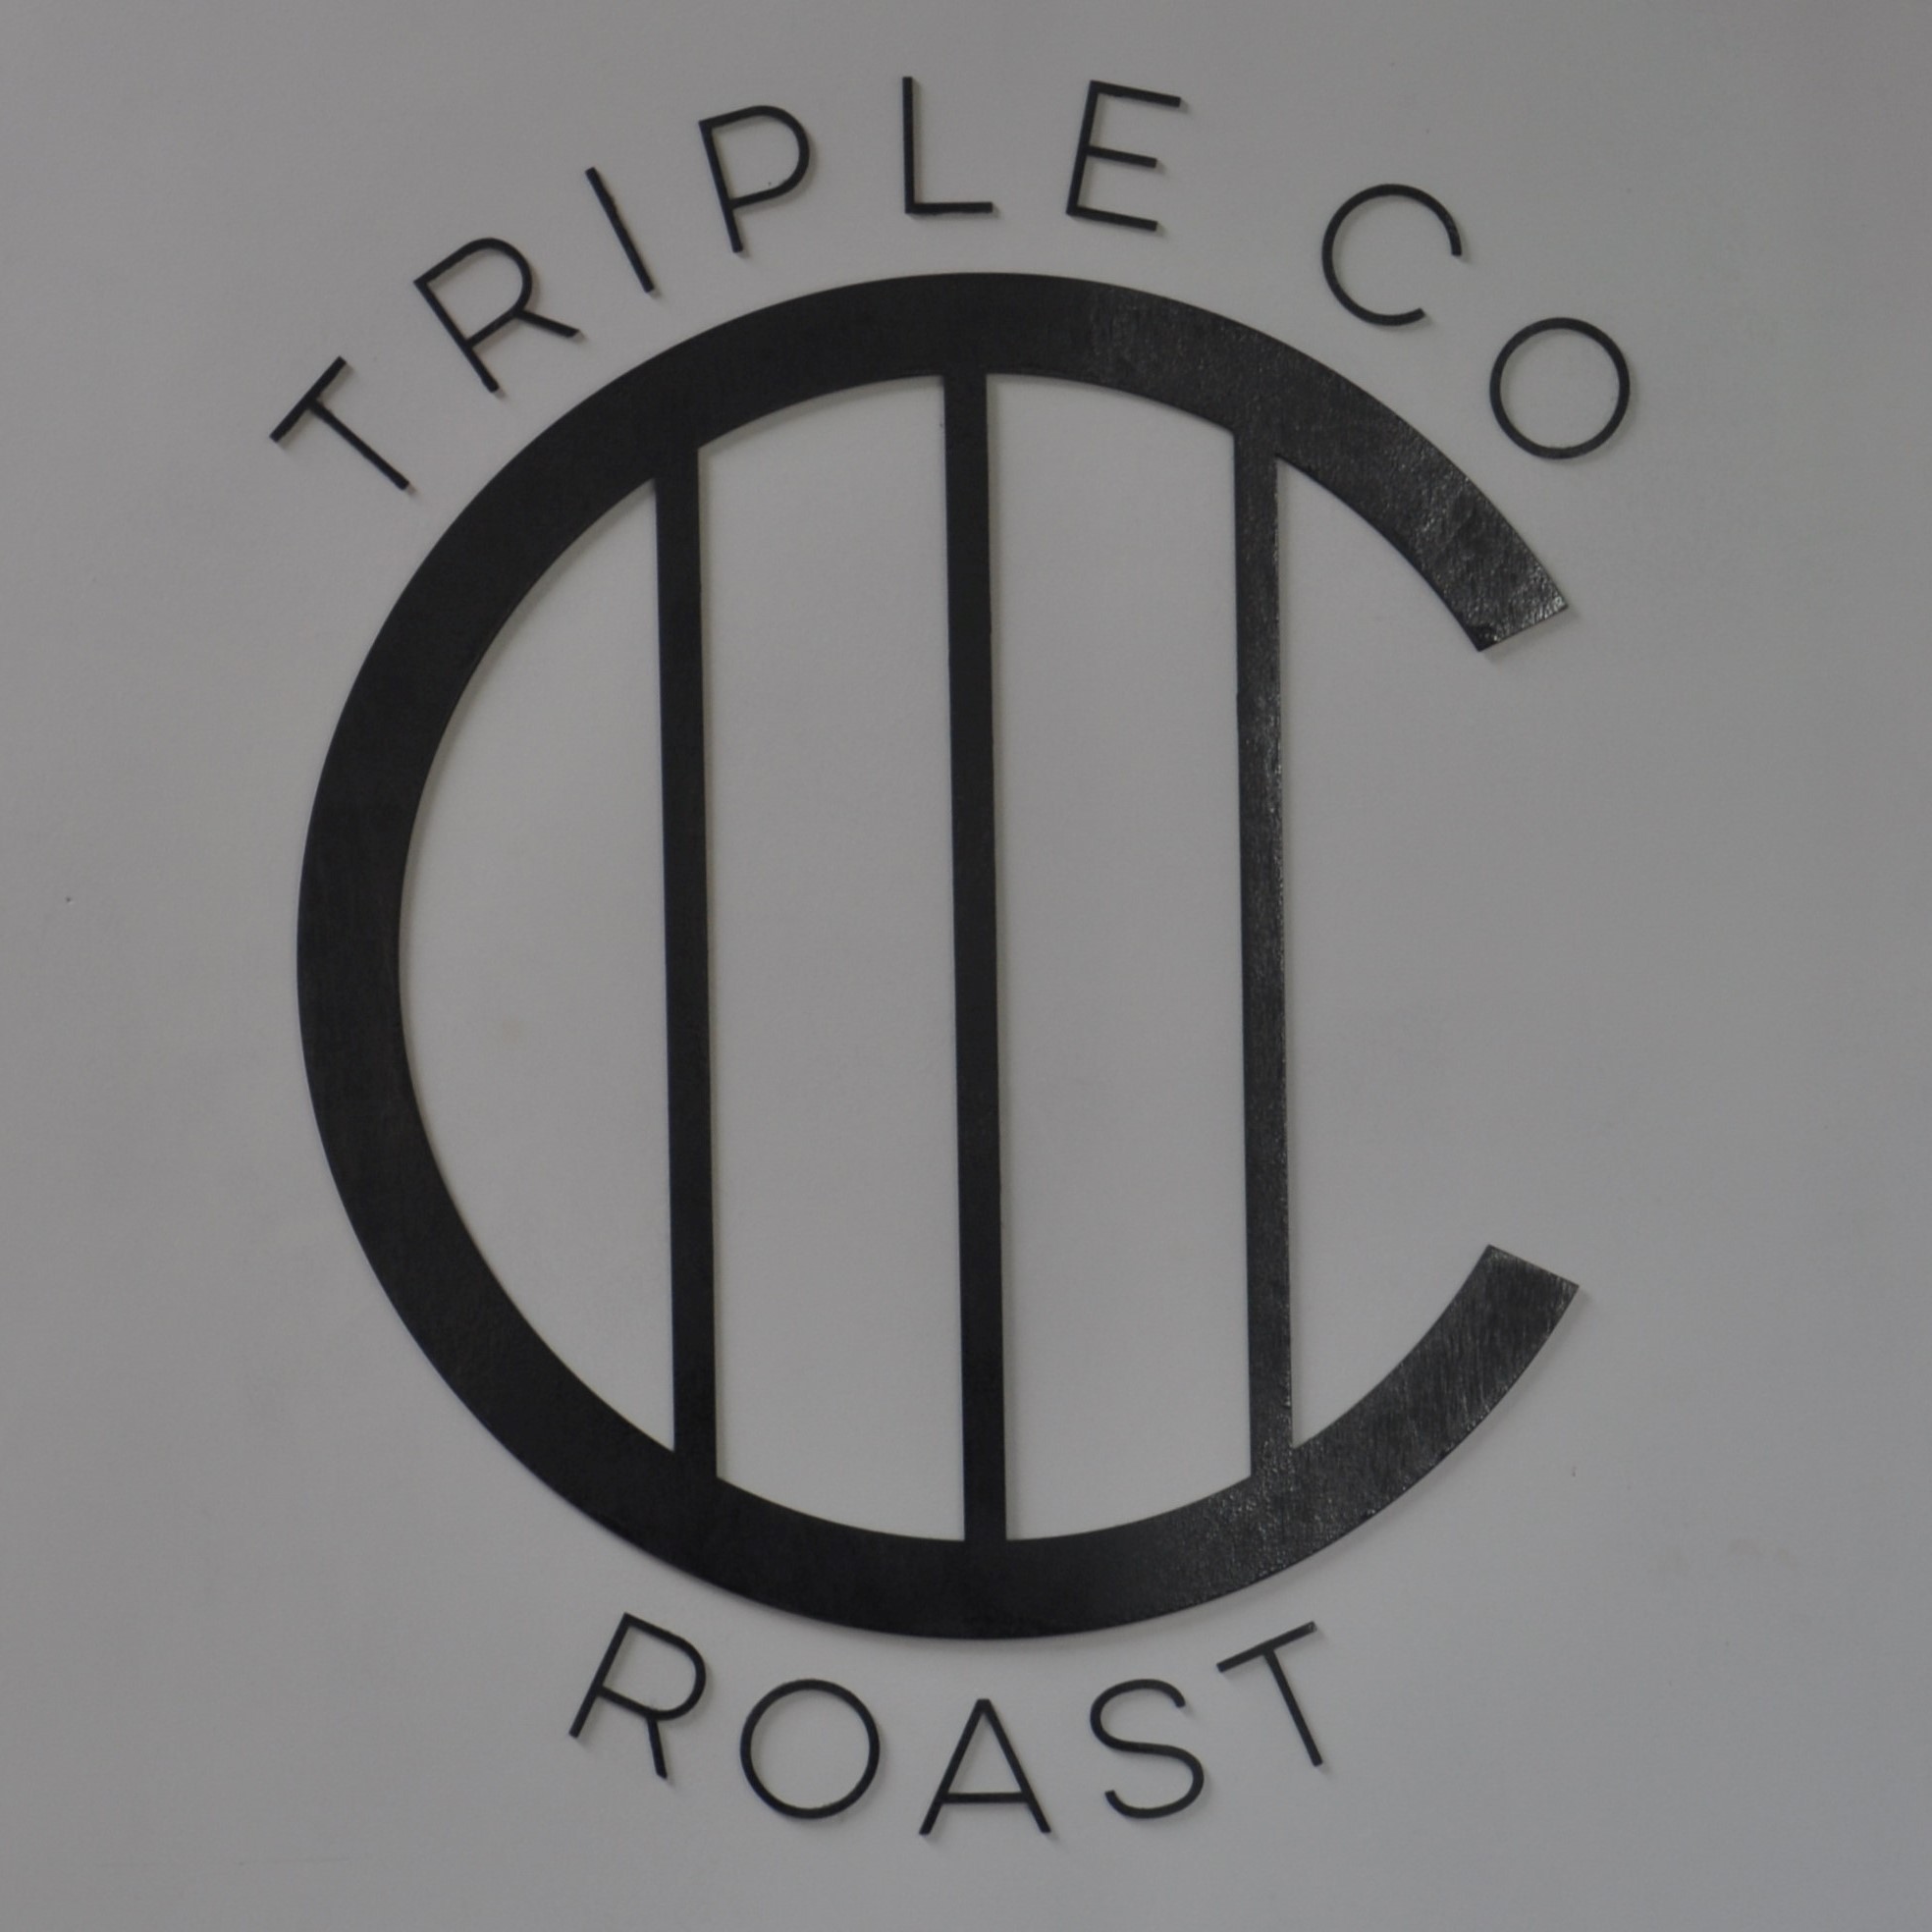 The Triple Co Roast Logo, which you'll find, along with the roastery and Elemental Espresso Bar, at the back of the Elemental Collective in Stokes Croft, Bristol.